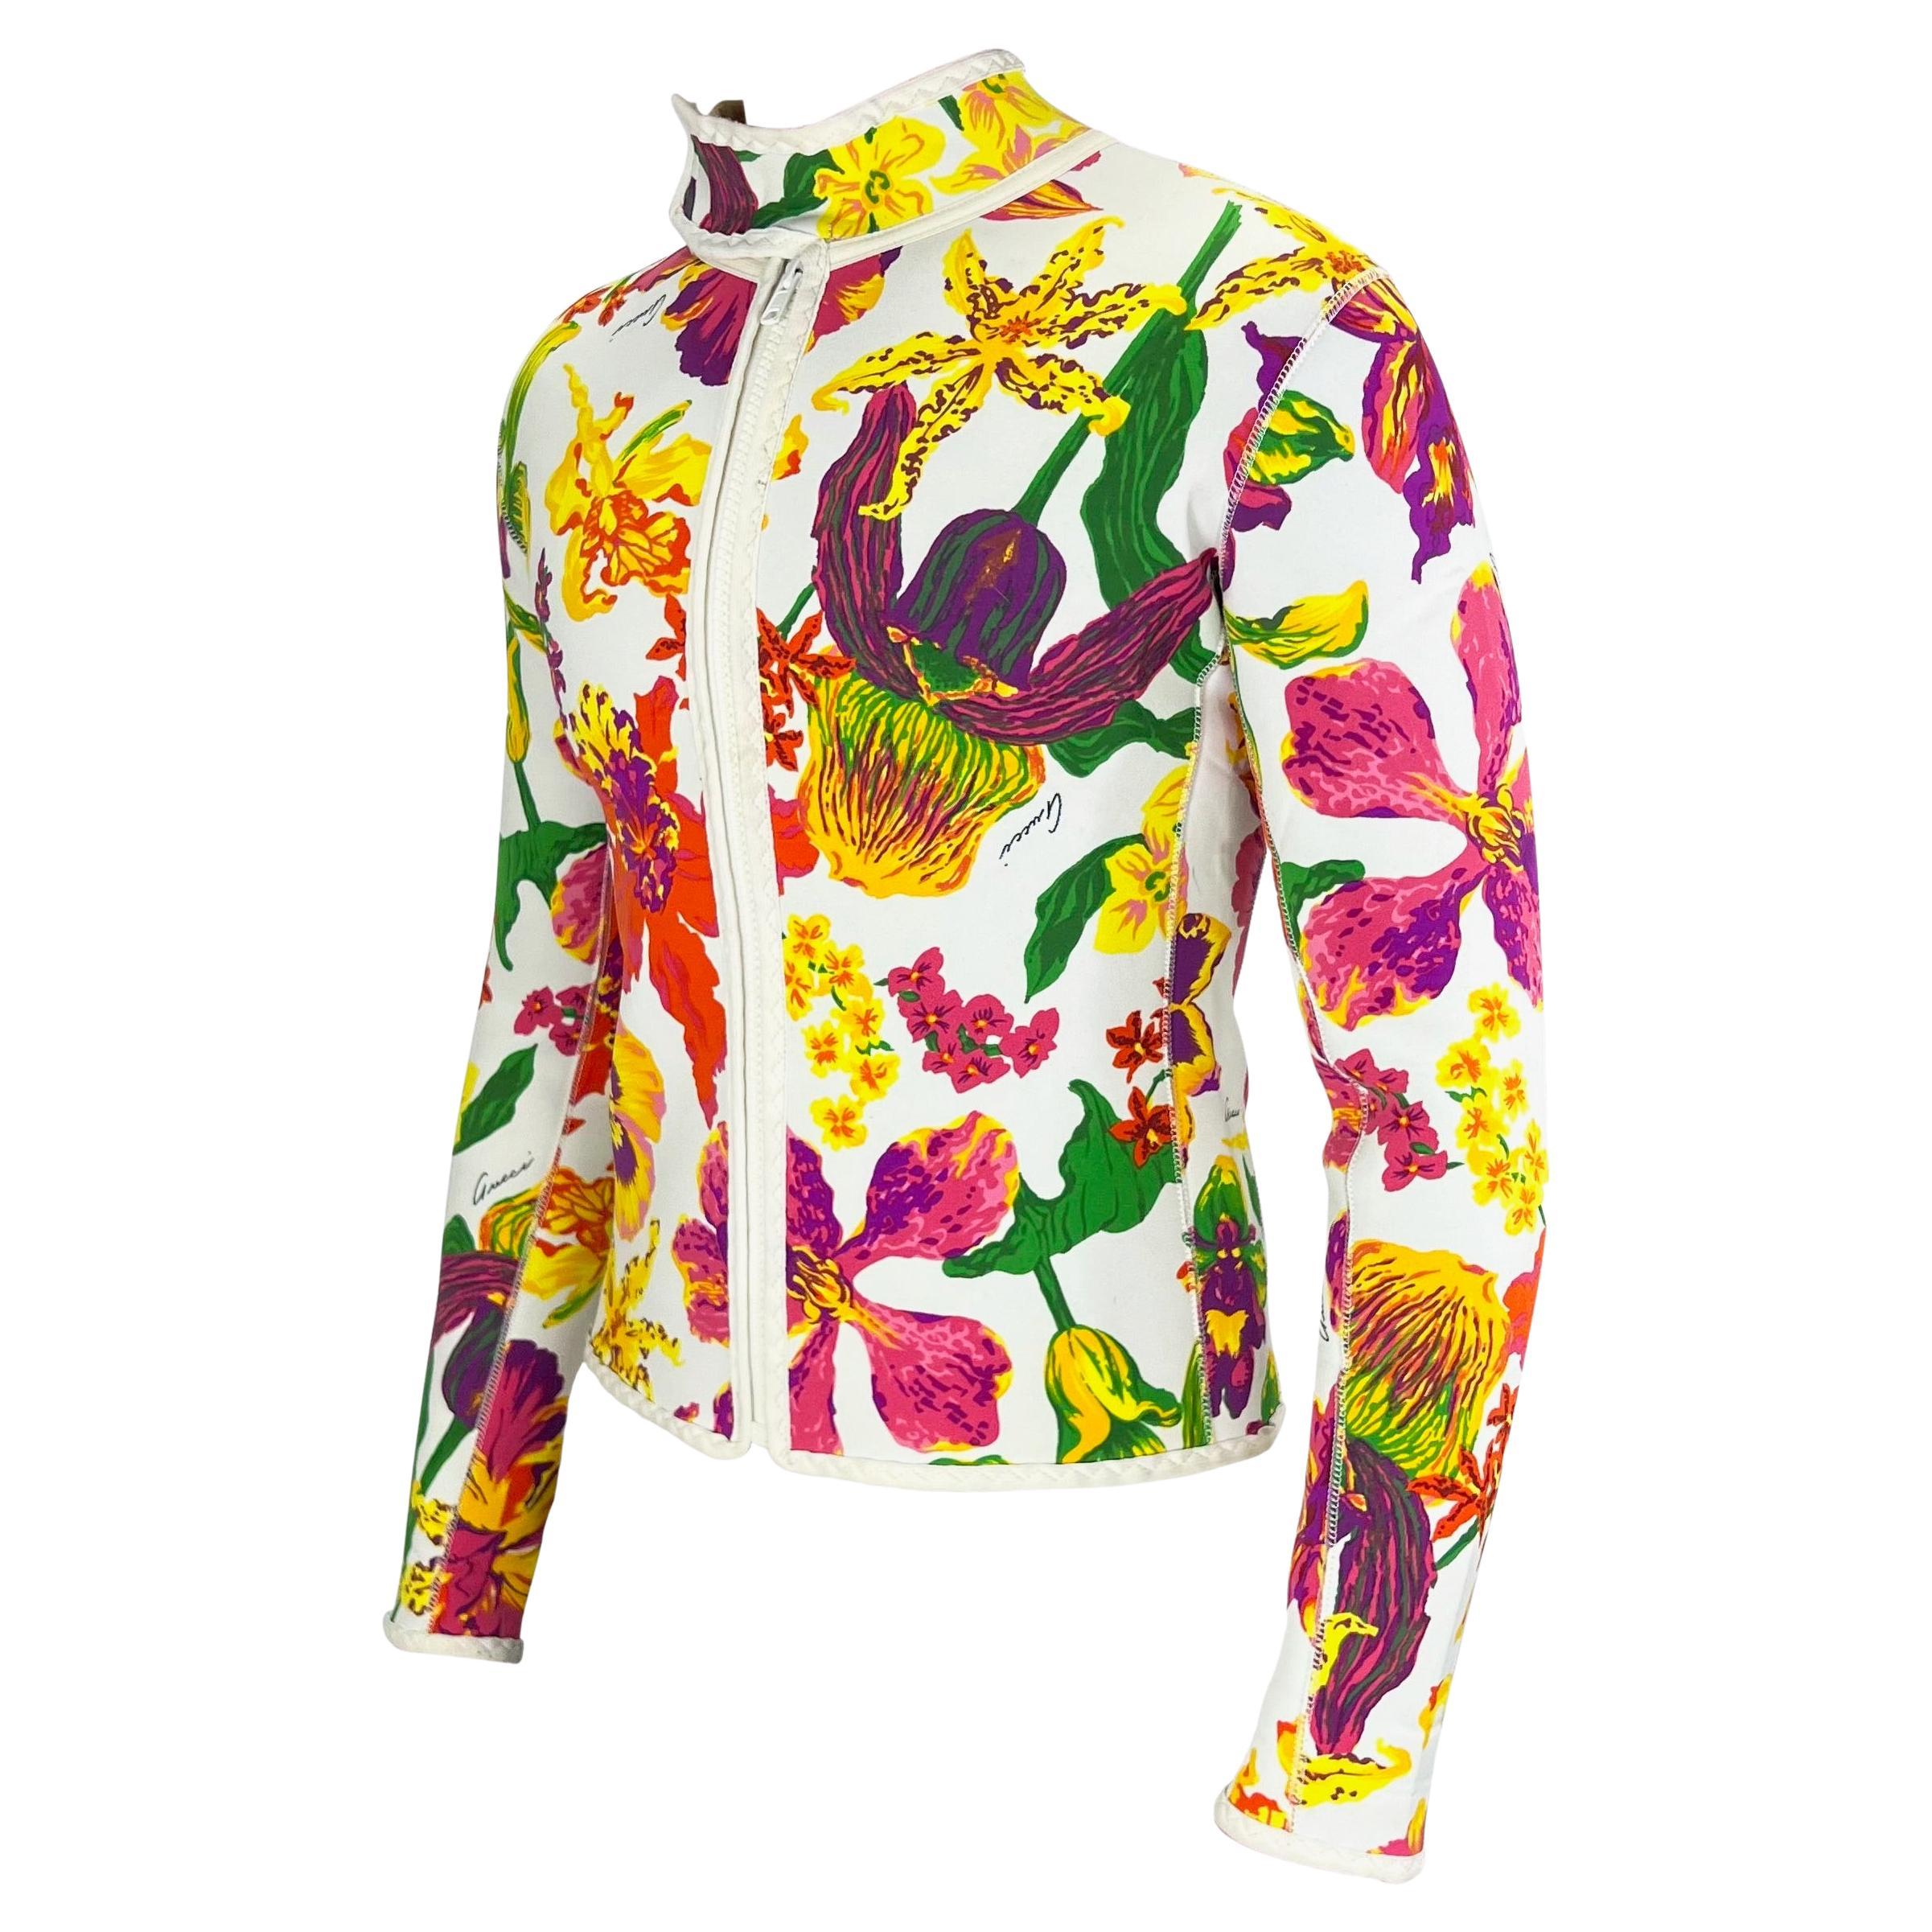 S/S 1999 Gucci by Tom Ford Men's Runway Ad White Floral Neoprene Scuba Jacket In Good Condition For Sale In West Hollywood, CA